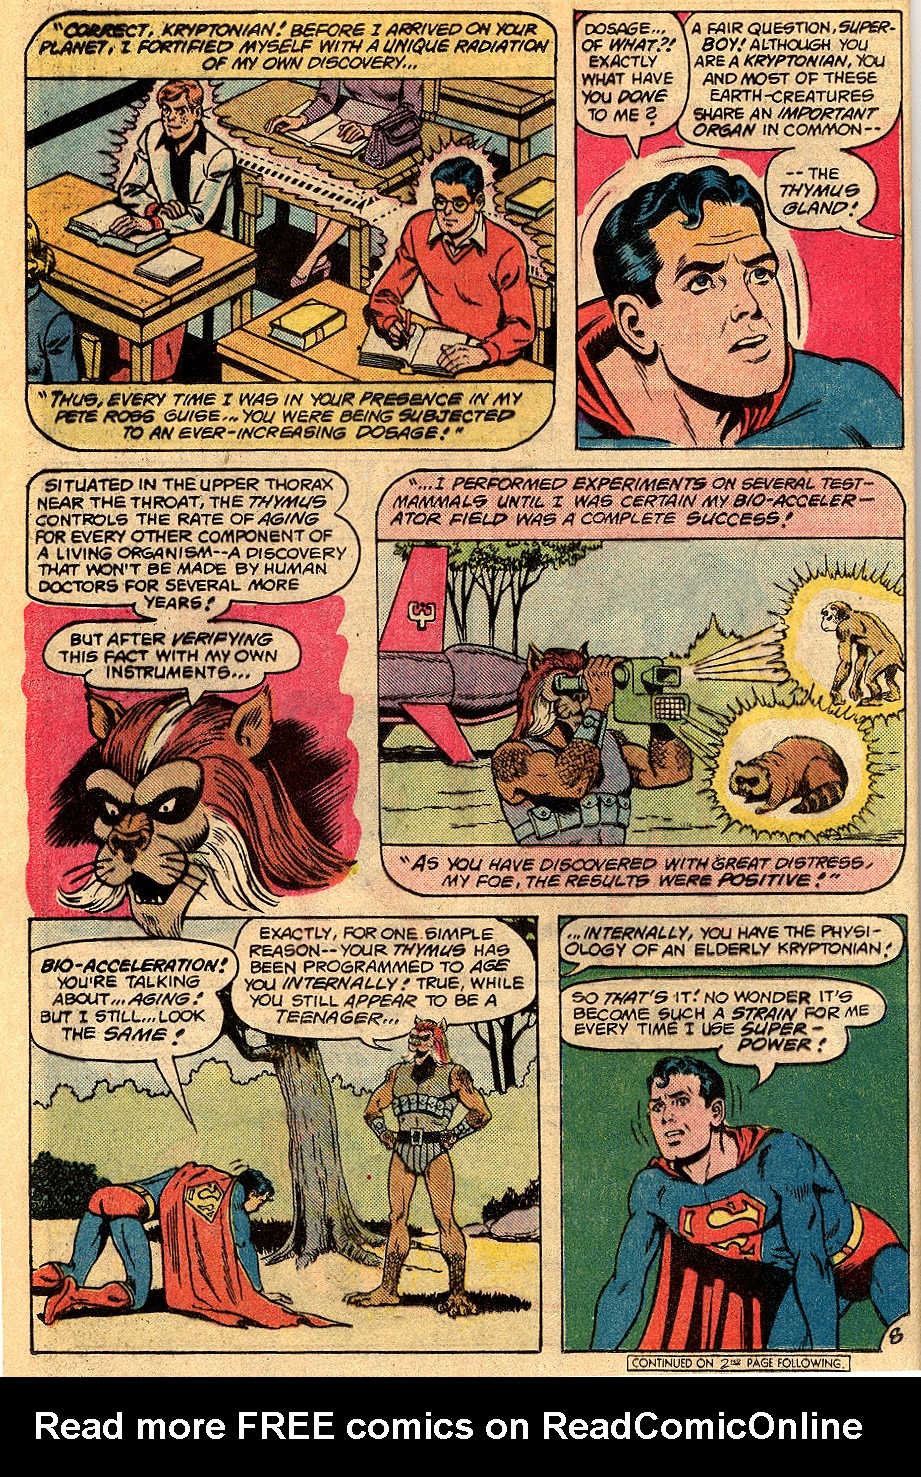 The New Adventures of Superboy 33 Page 11